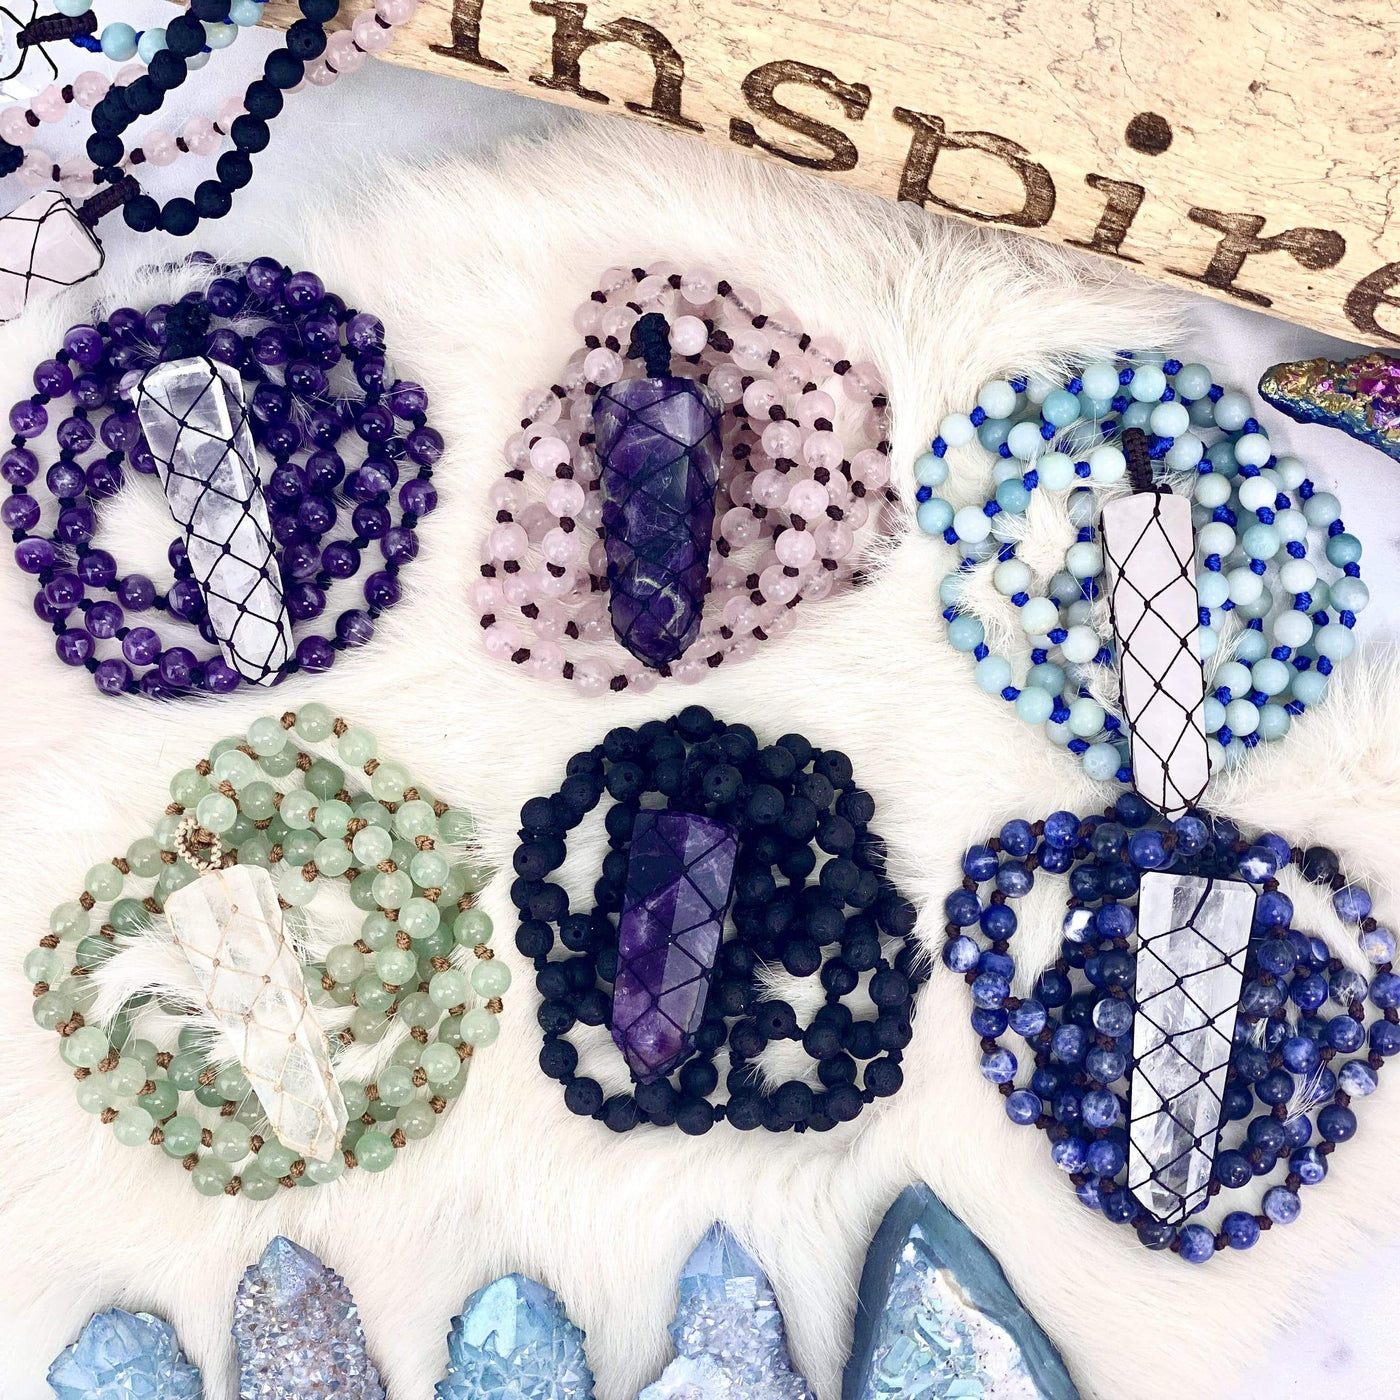 gemstone point pendants all curled up